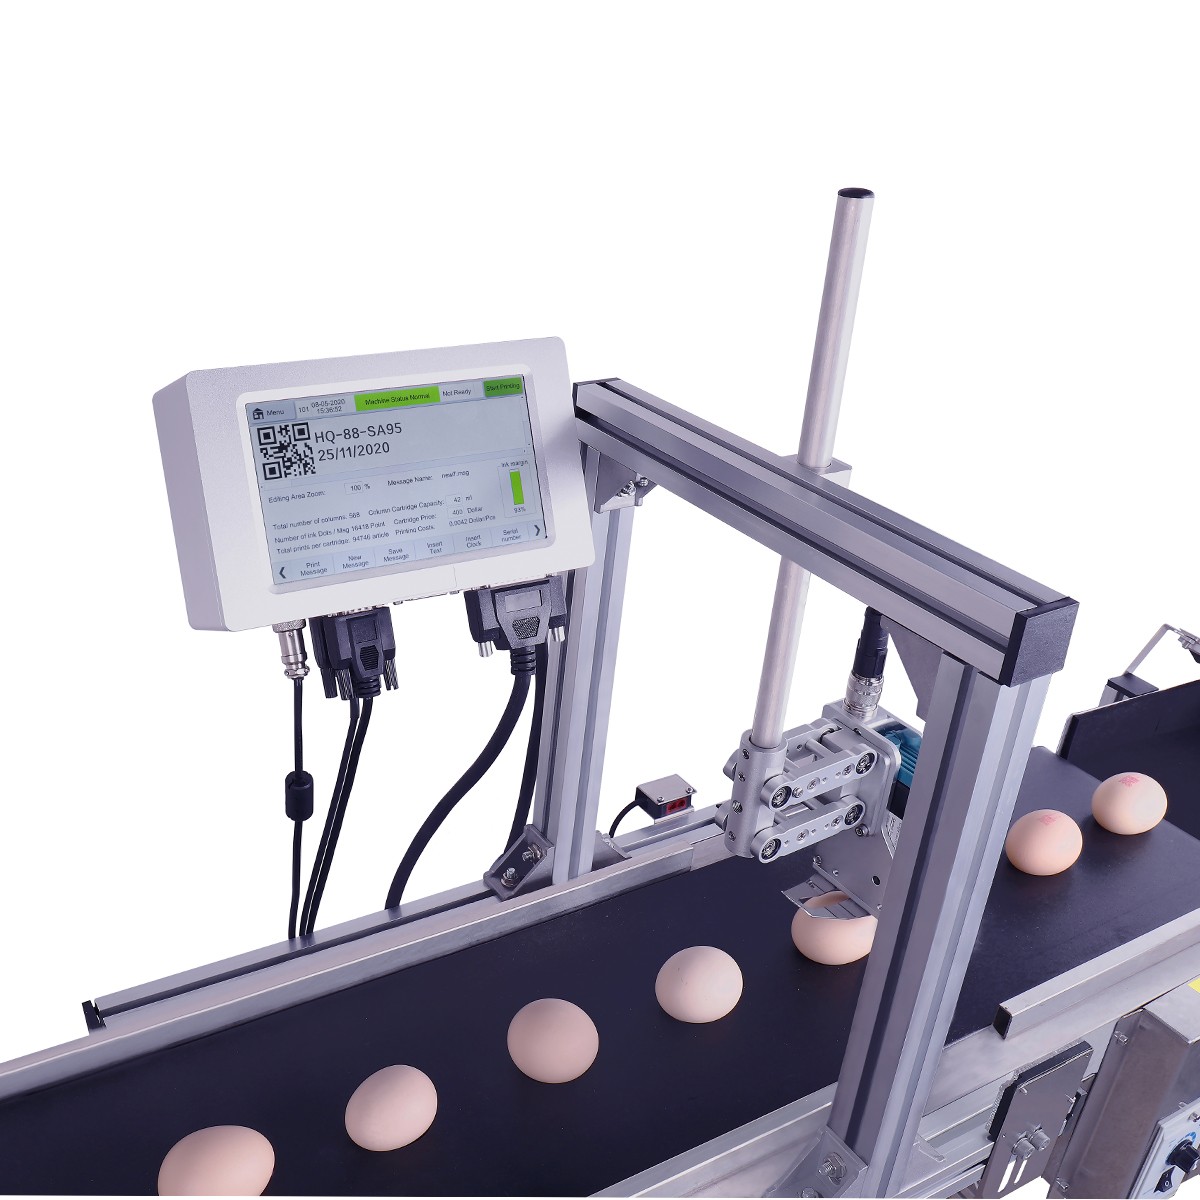 Docod - Your Trusted Partner for Precision Coding on Eggs